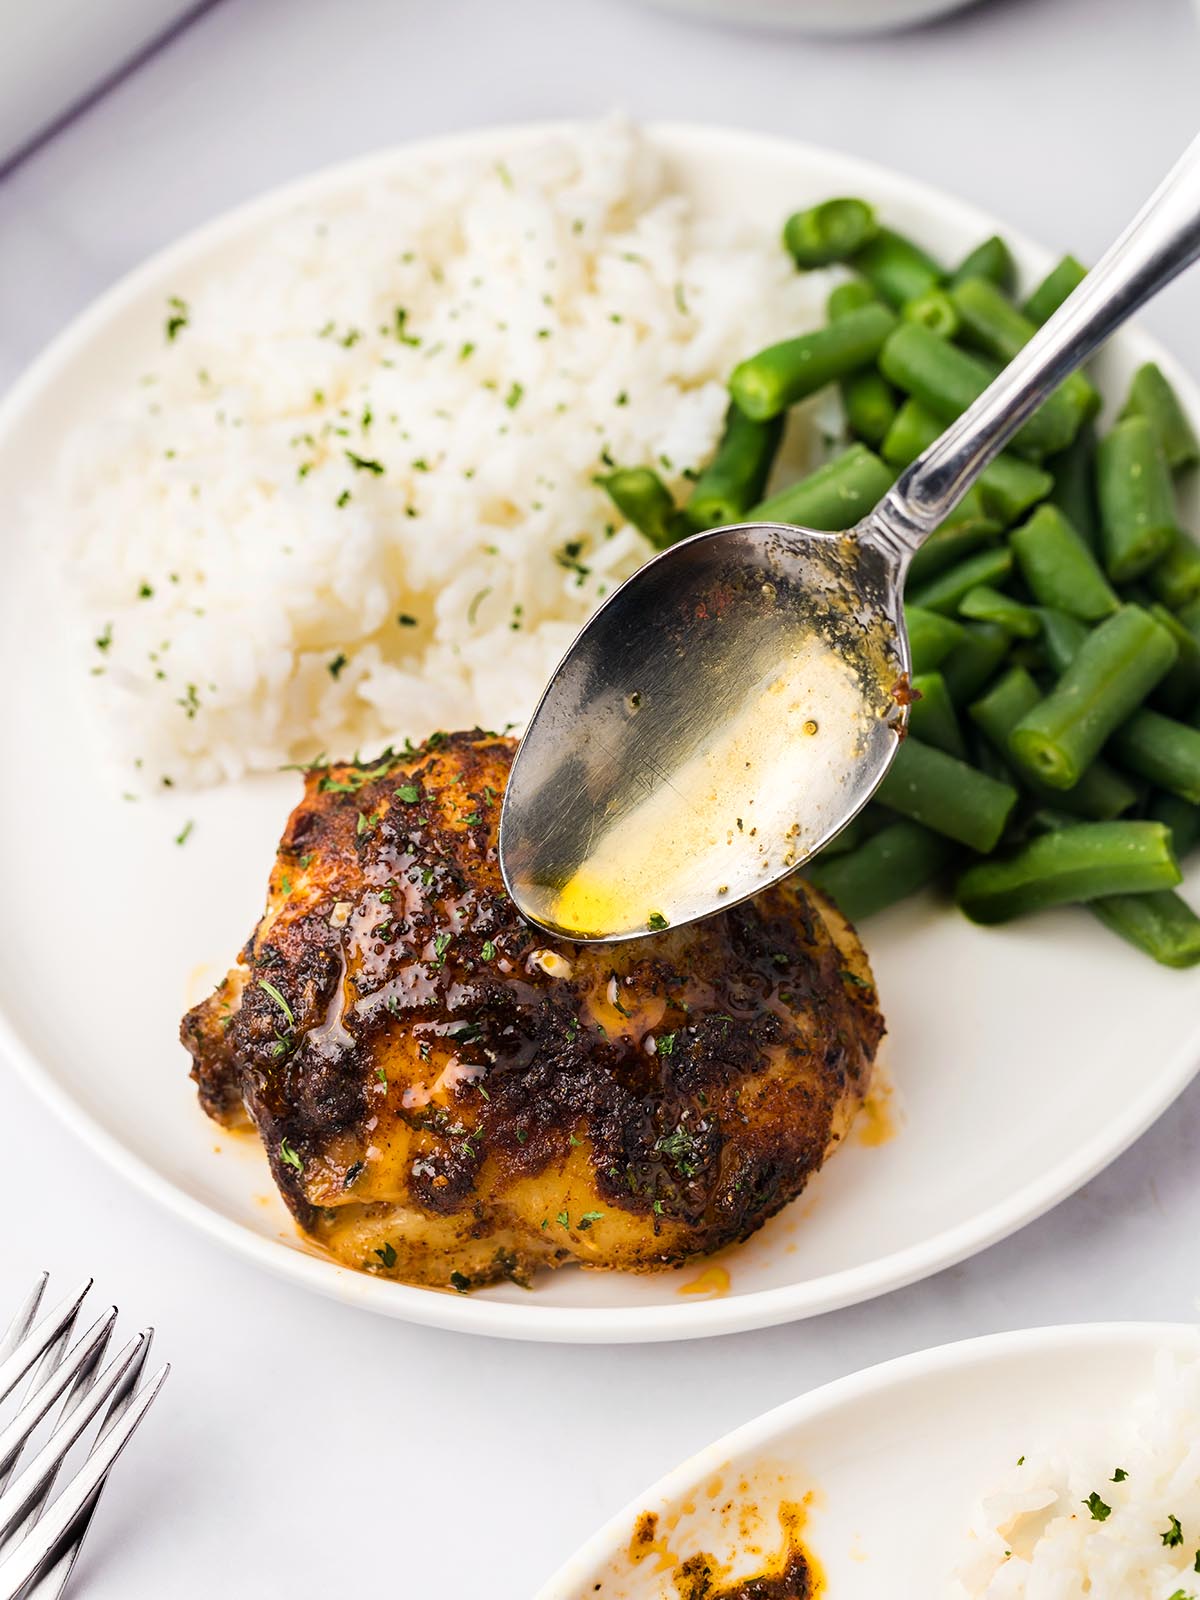 A baked chicken thigh with white rice and green beans on a white plate.